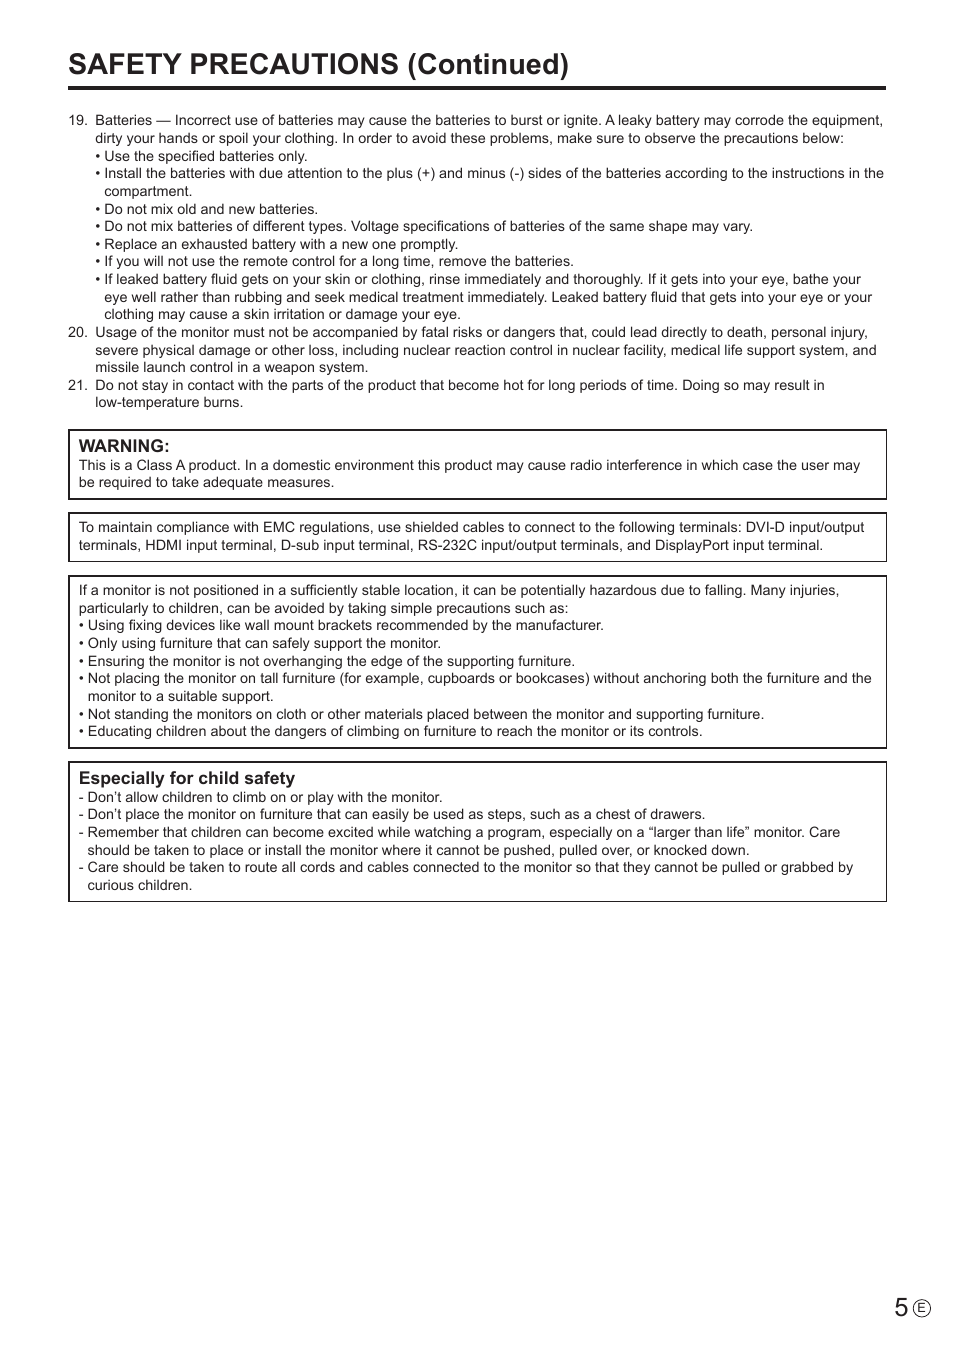 Safety precautions (continued) | Sharp PN-U423 User Manual | Page 5 / 54